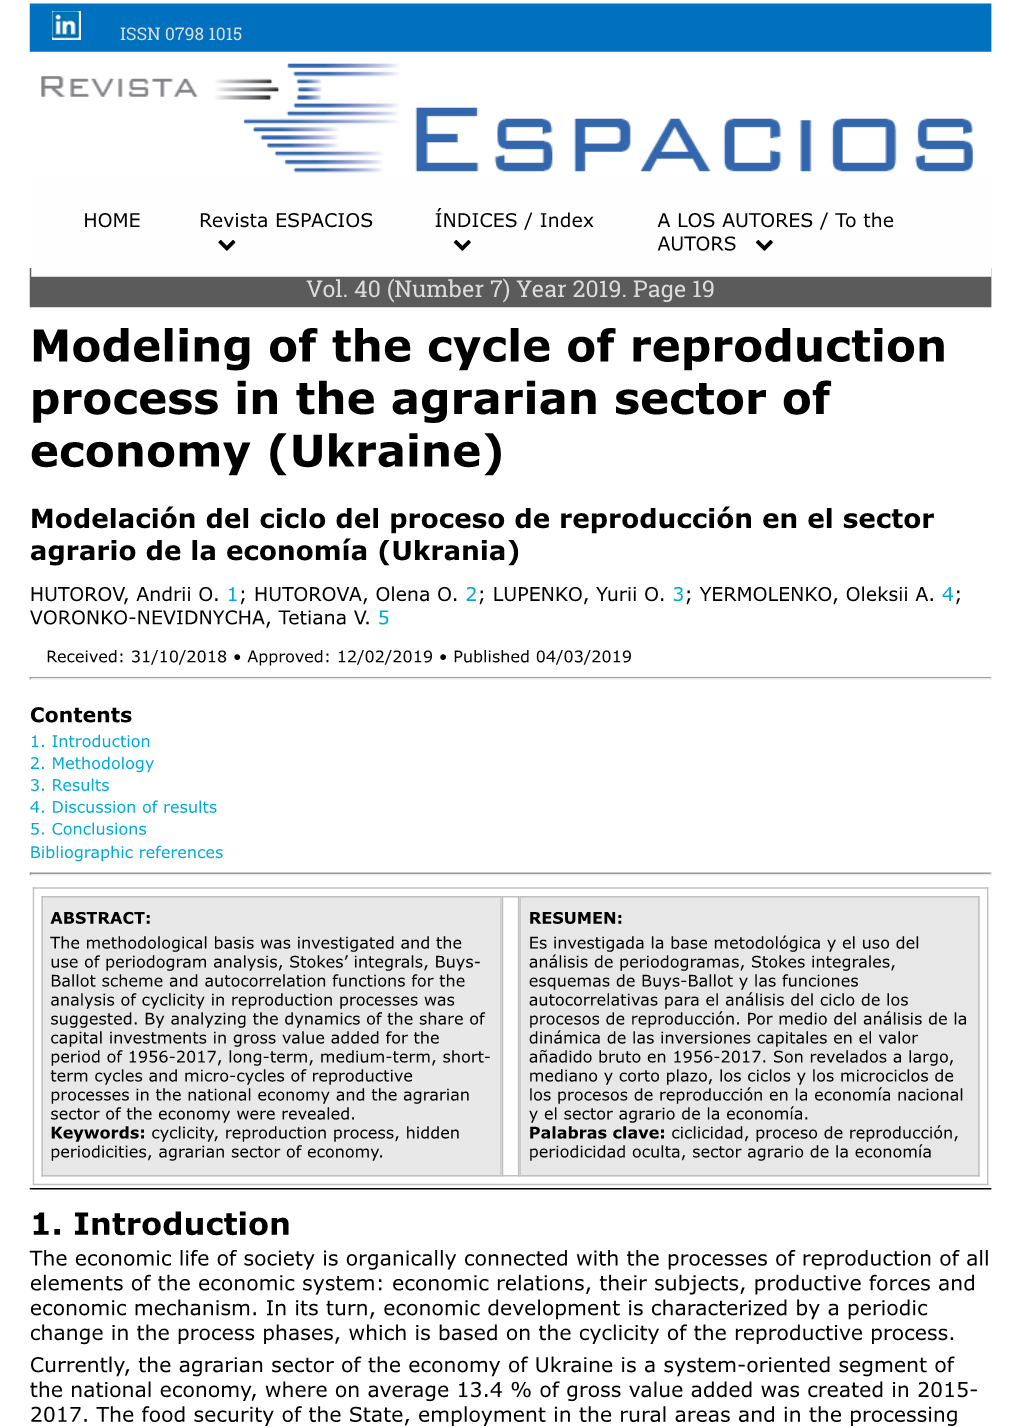 Modeling of the Cycle of Reproduction Process in the Agrarian Sector of Economy (Ukraine)